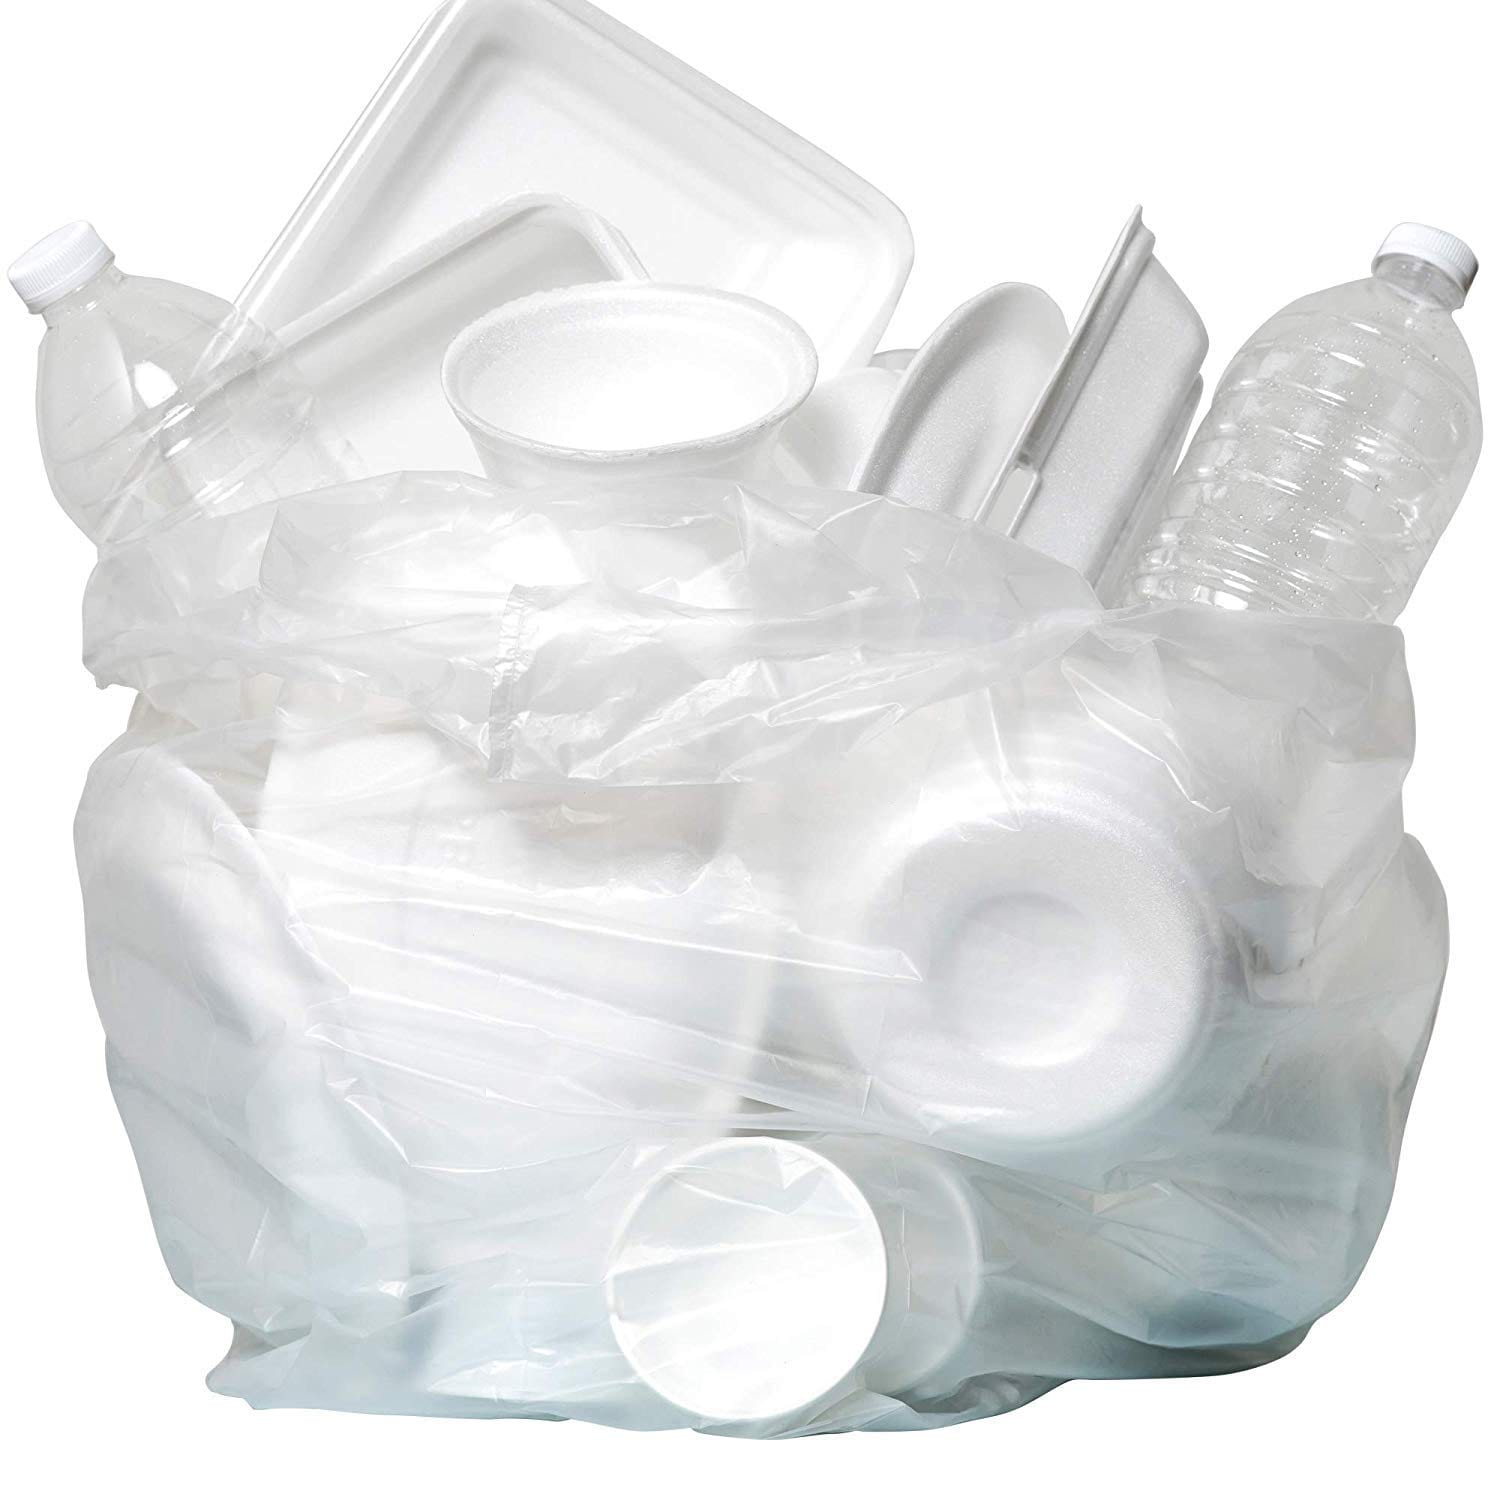 Aluf Plastics 21 gal. 1 Mil White Trash Bags 28 in. x 34 in. Pack of 45 for Bathroom, Bedroom, Office and Kitchen